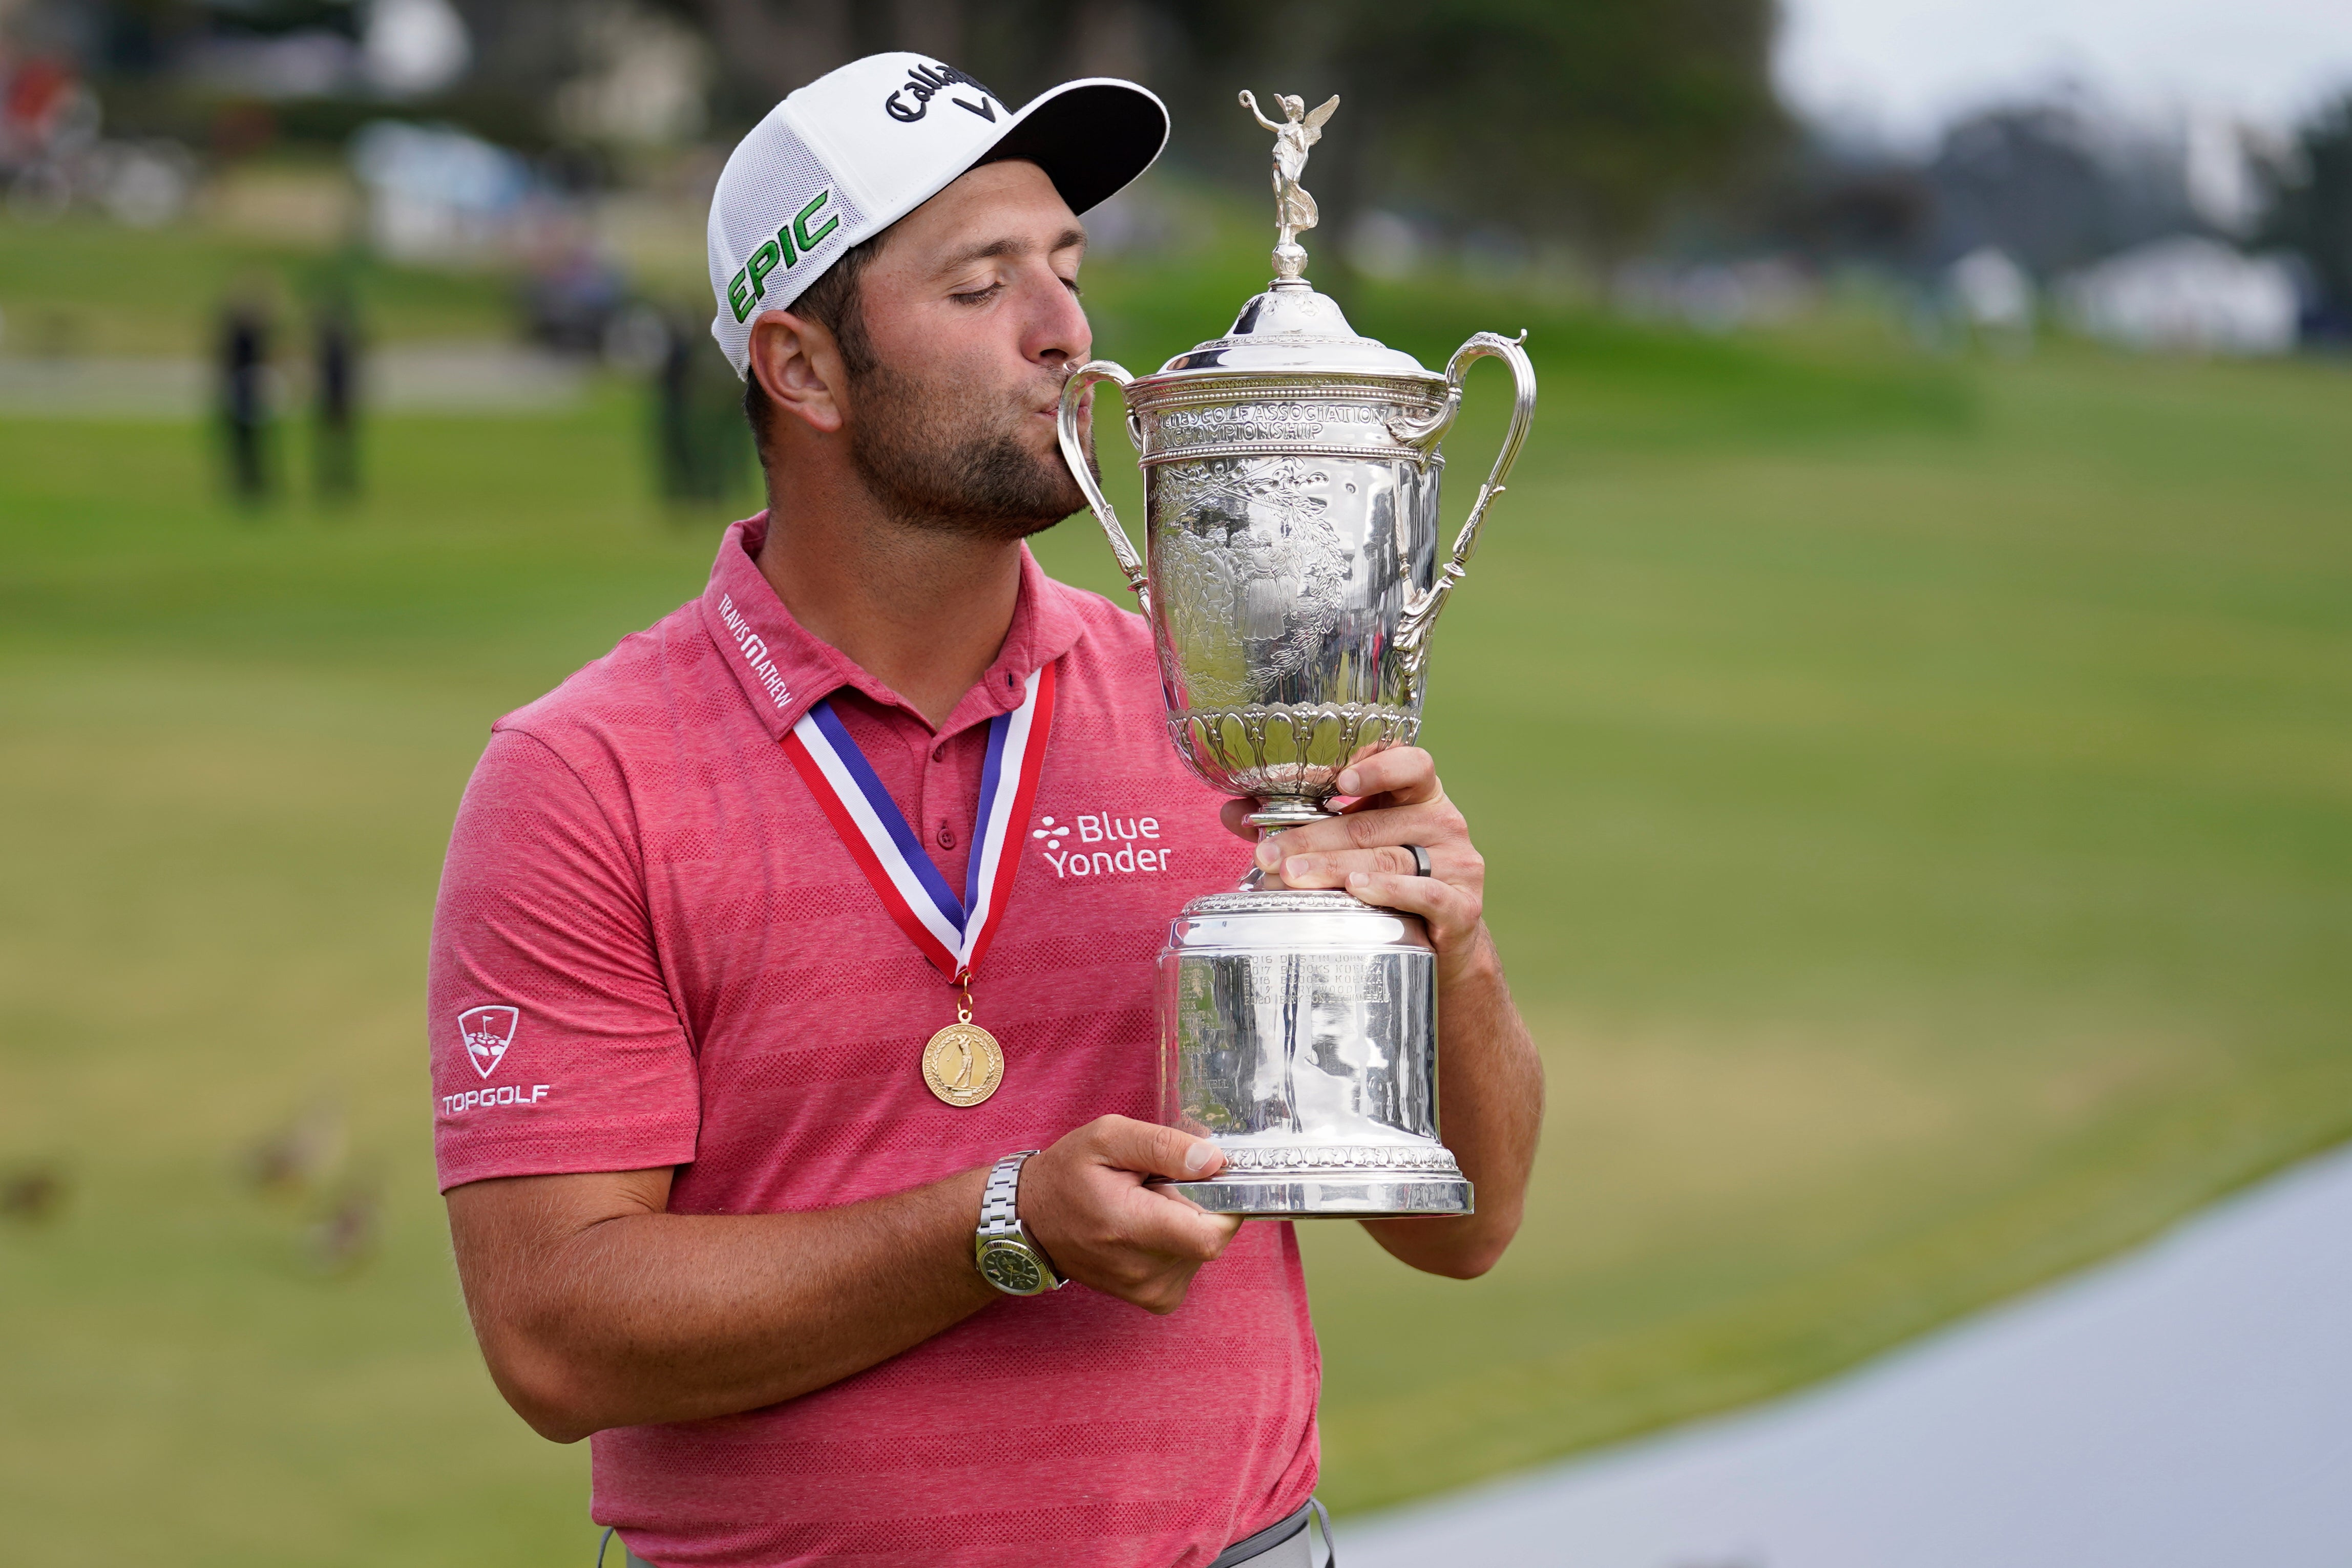 Jon Rahm is looking to defend his US Open title